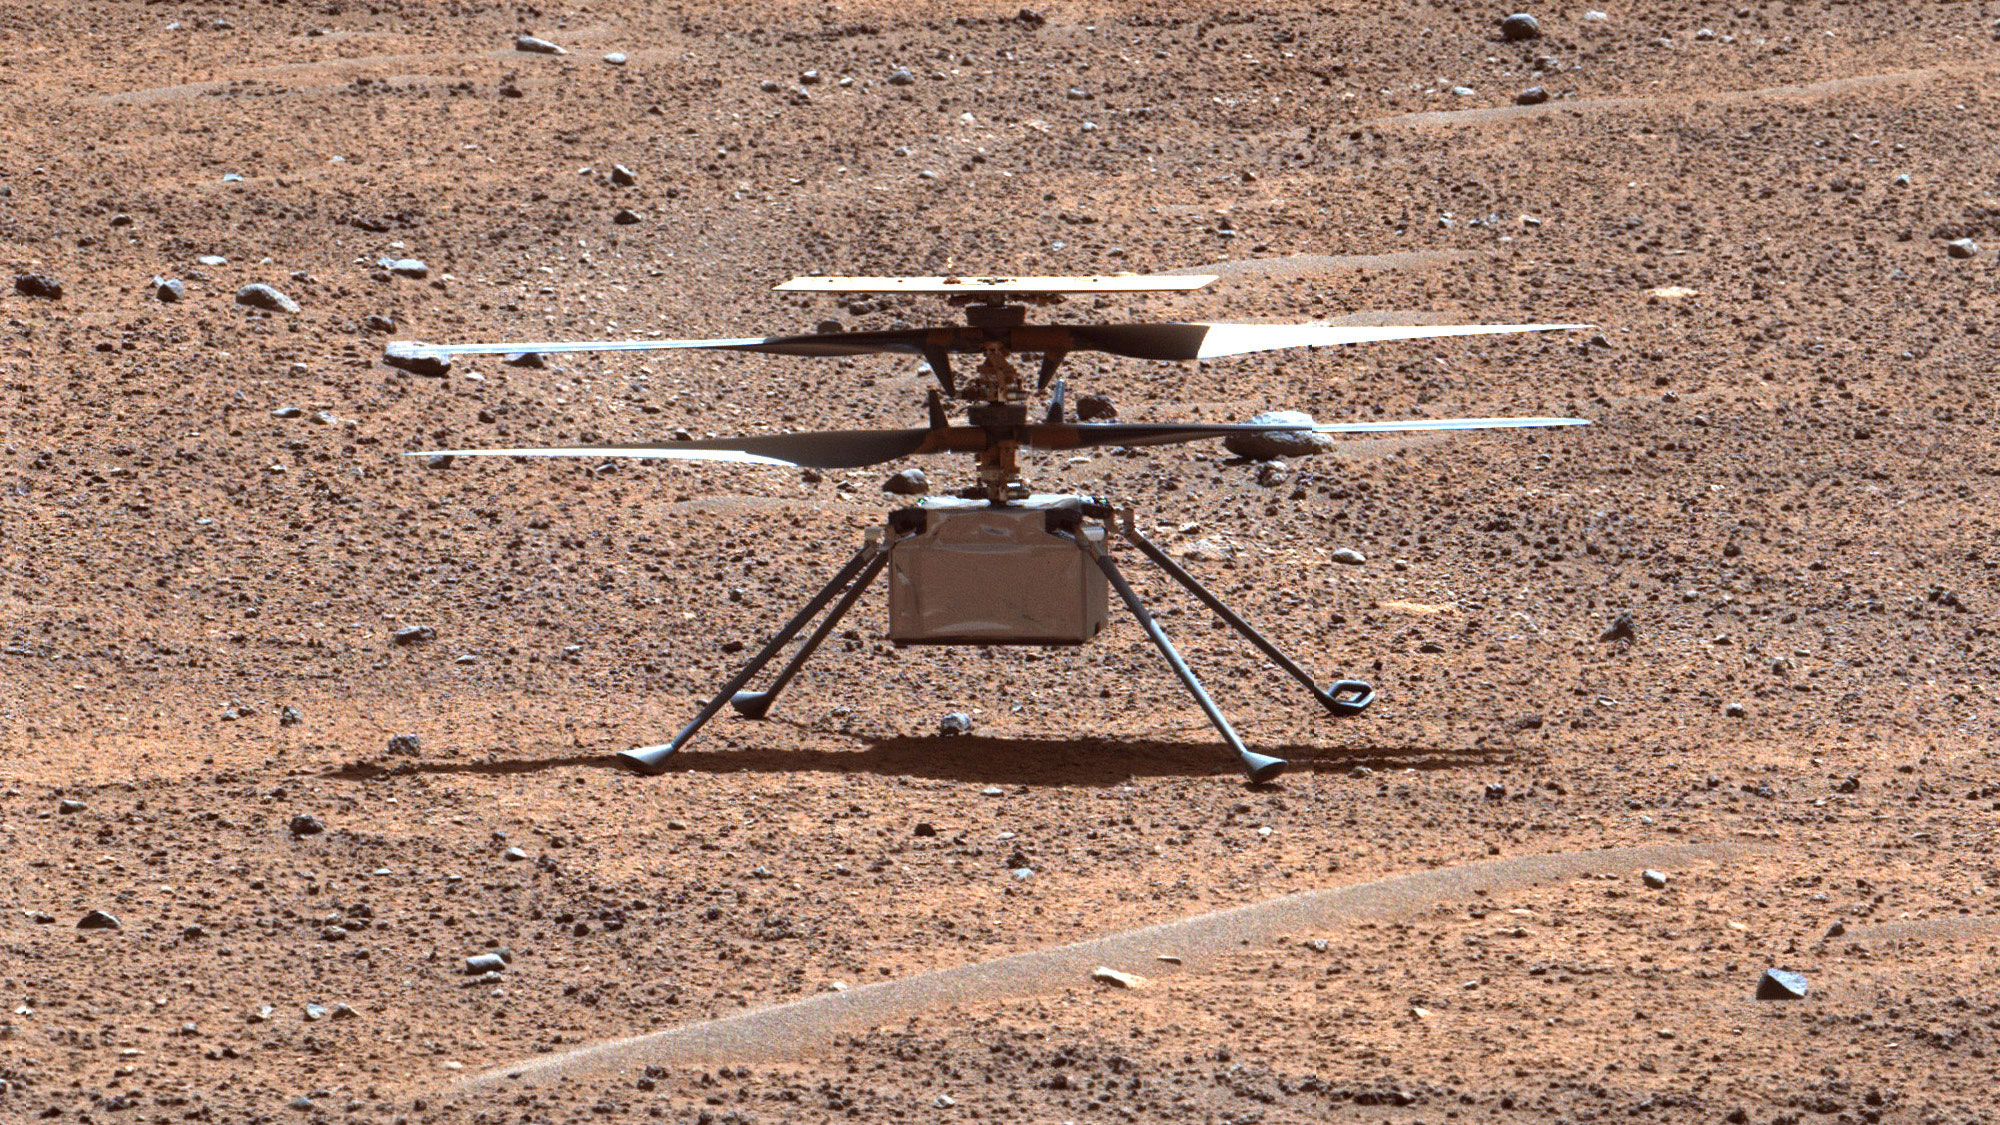 Ingenuity rotocopter on Mars